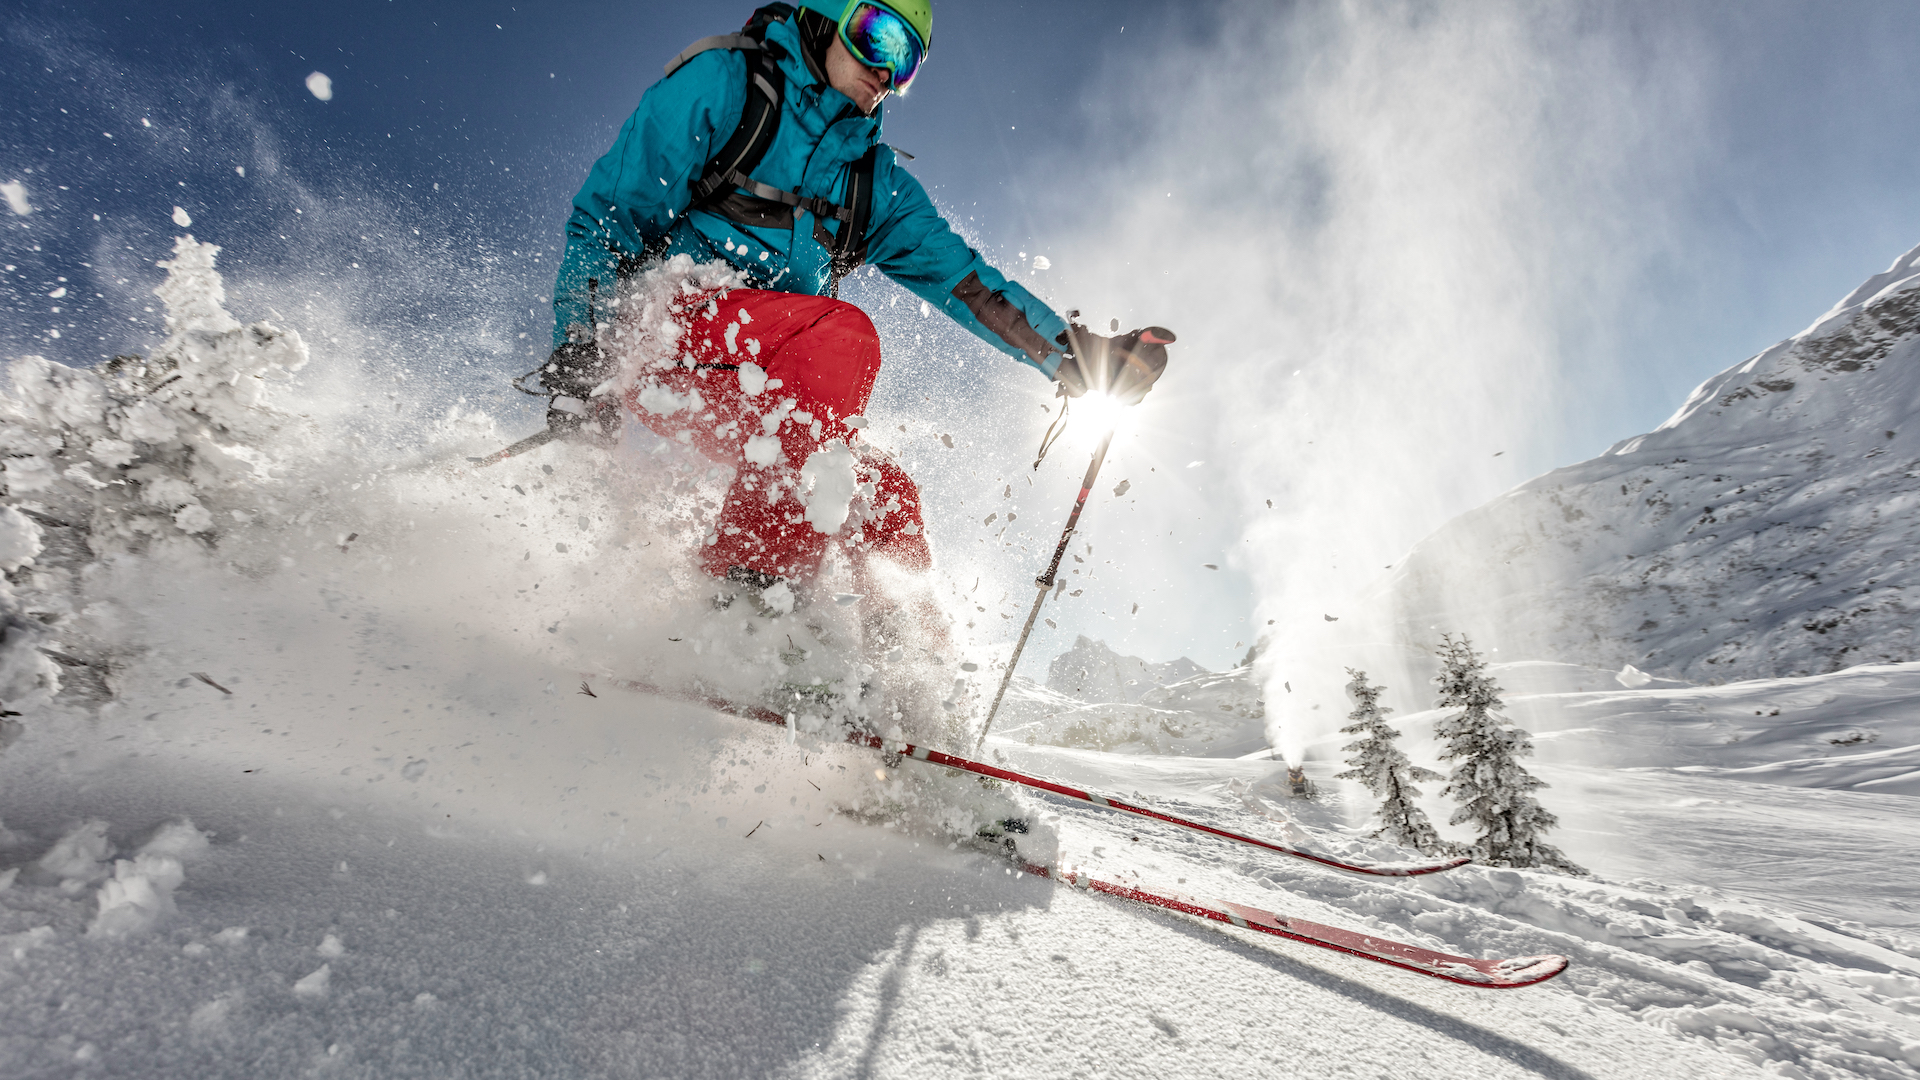 How to wash your ski jacket and pants